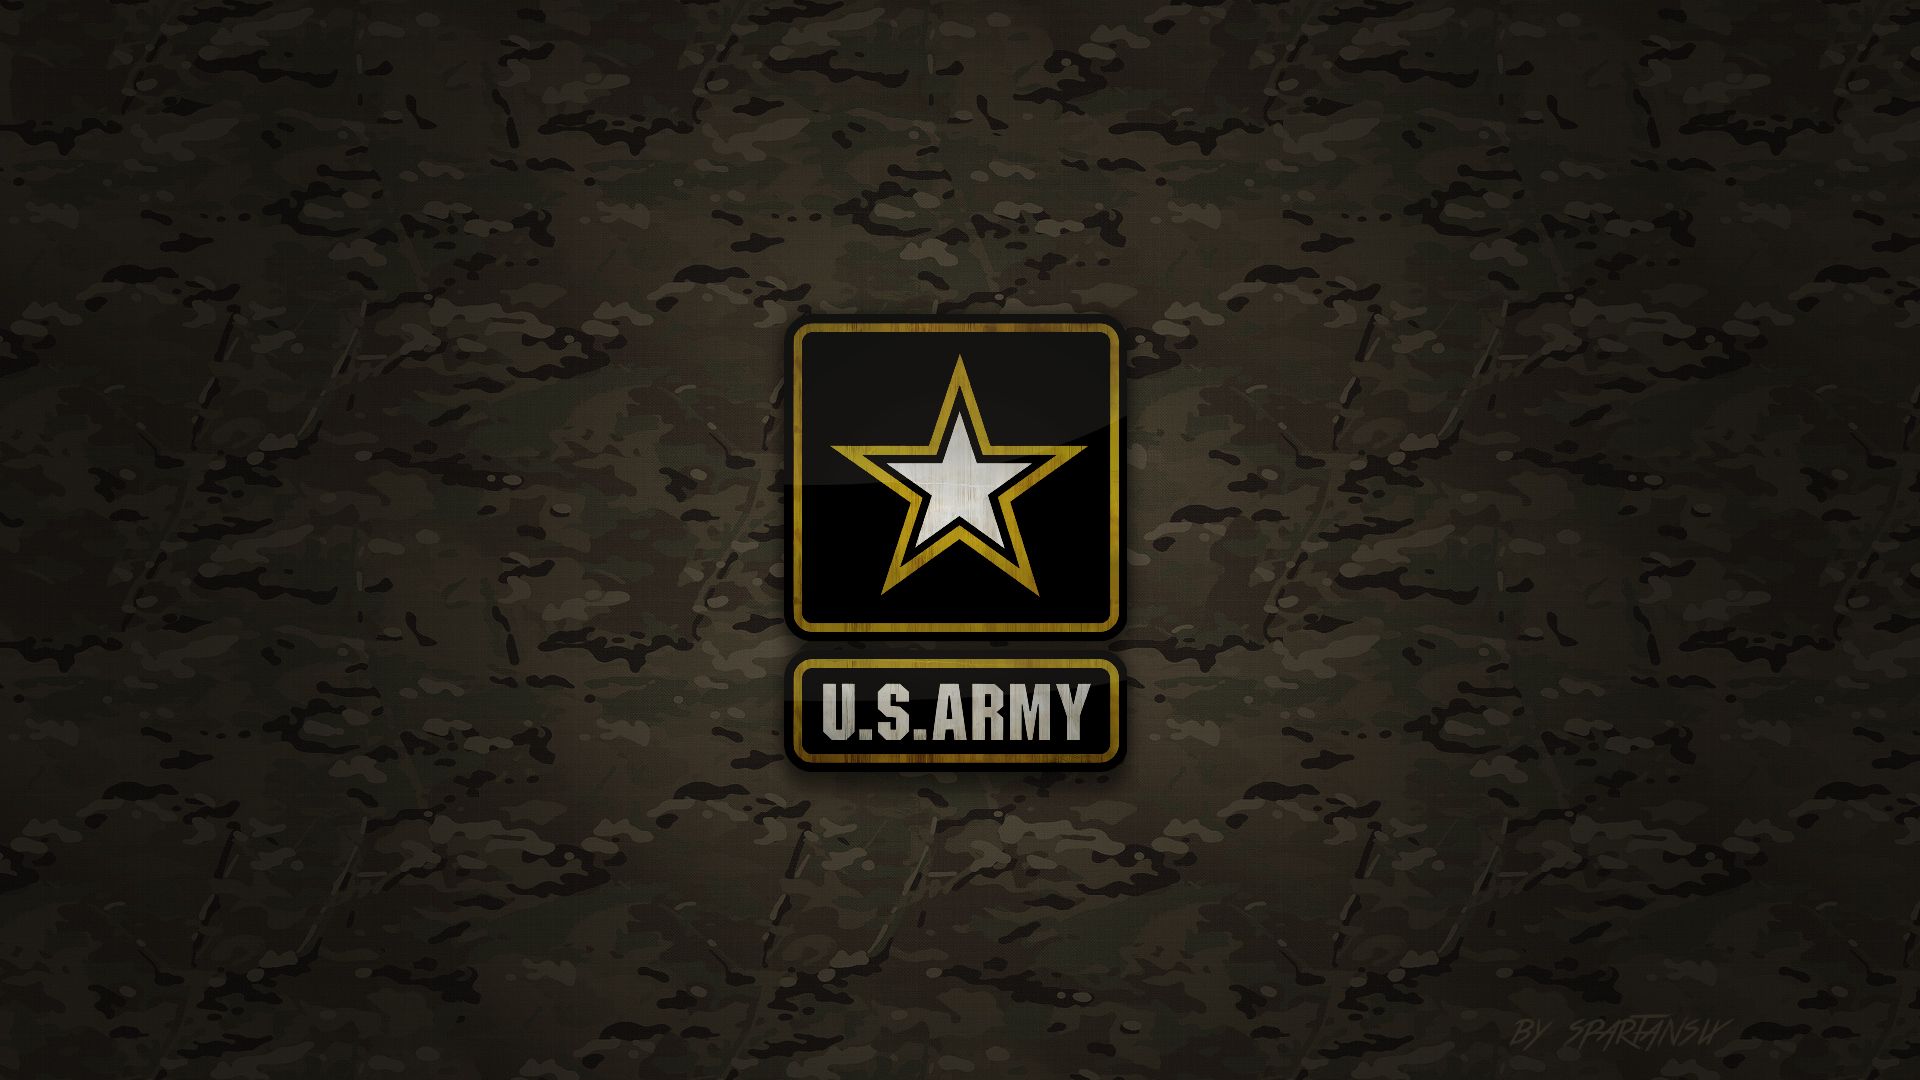 US Army Wallpaper 2182 - Amazing Wallpaperz